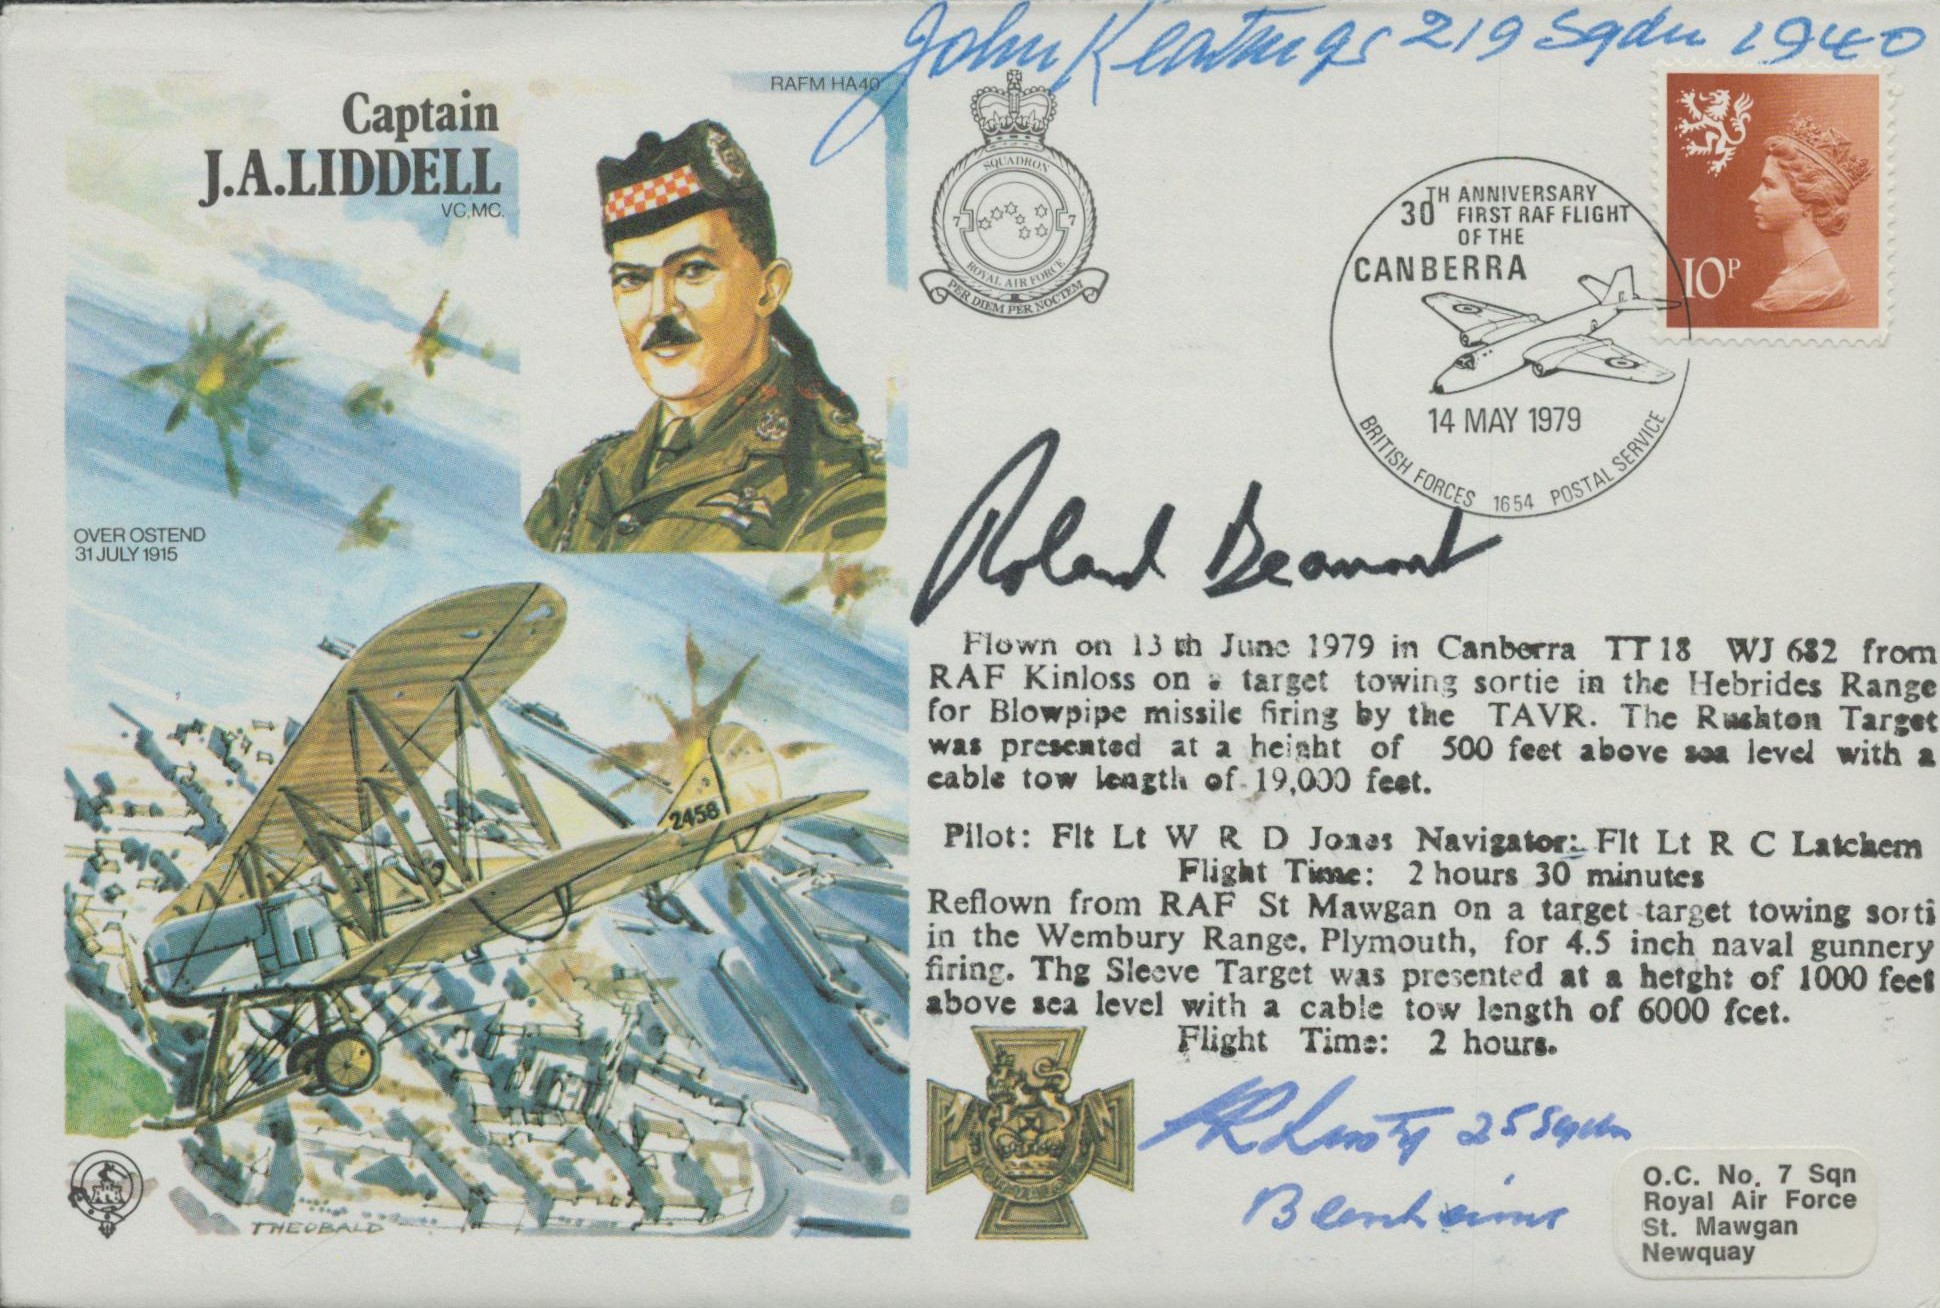 WW2 Battle of Britain fighter aces treble signed Capt Liddell VC Historic aviators cover. Signed